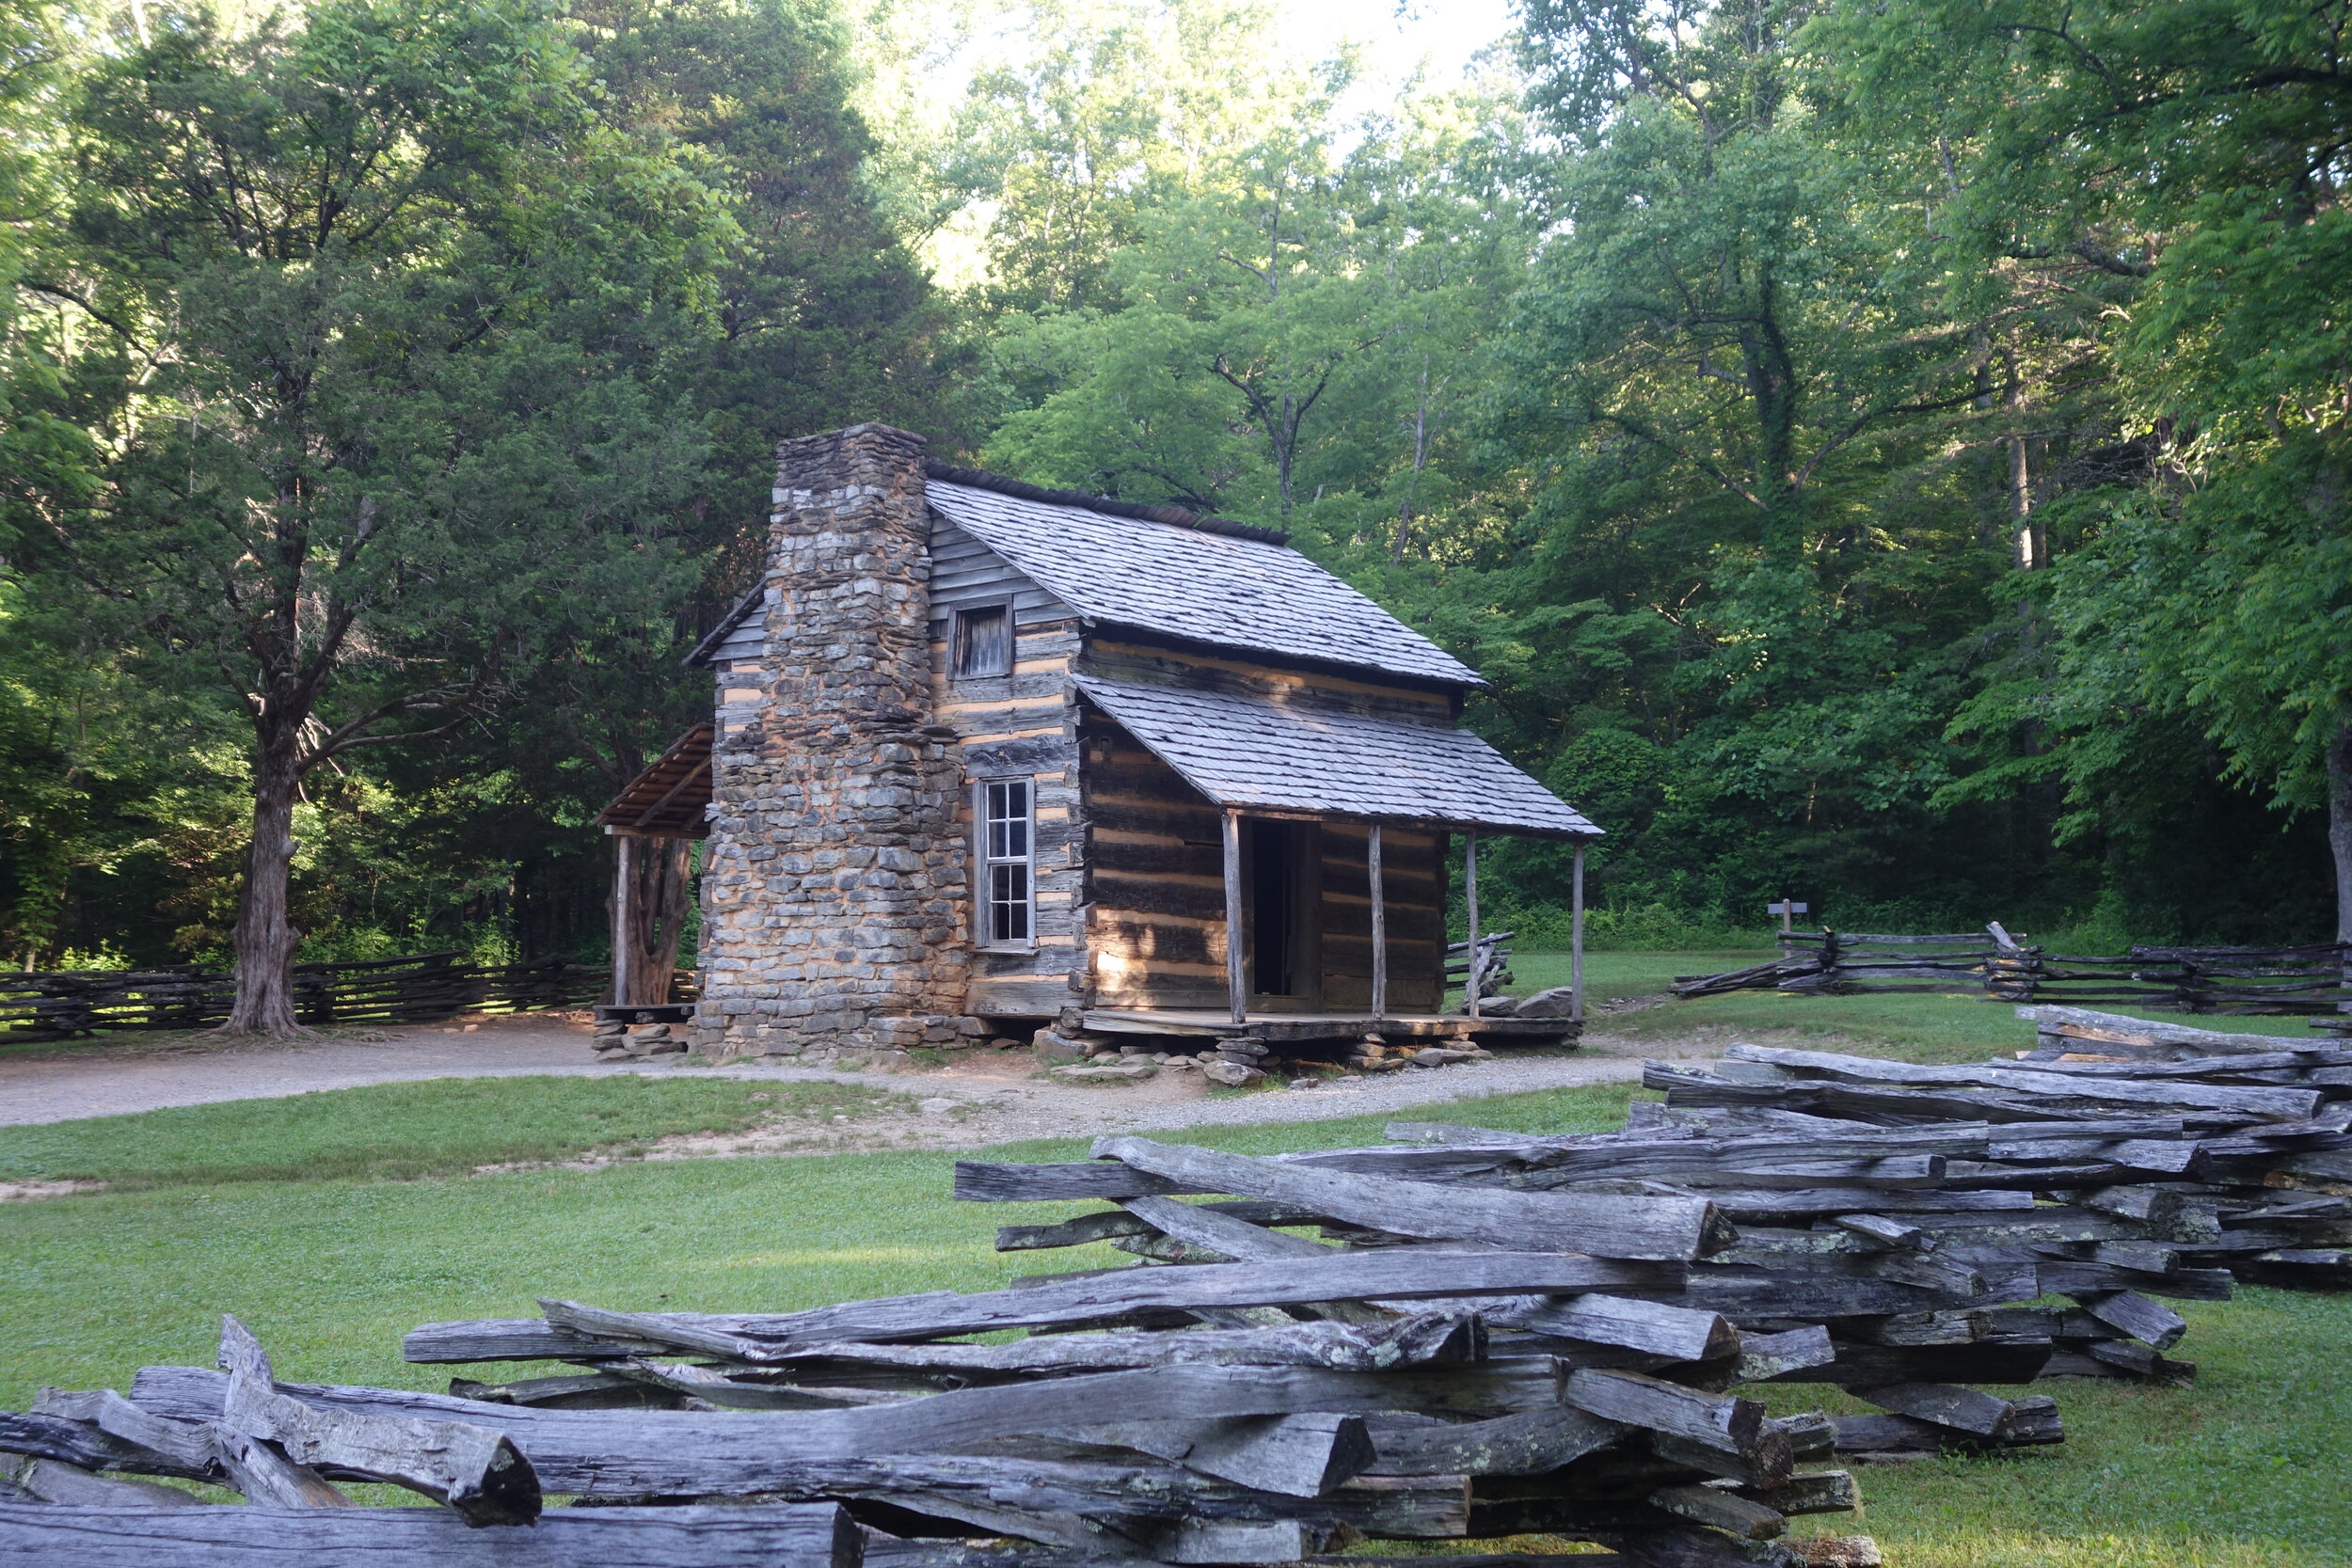 Remnants of historic life in the park are preserved at Cades Cove and other locations.